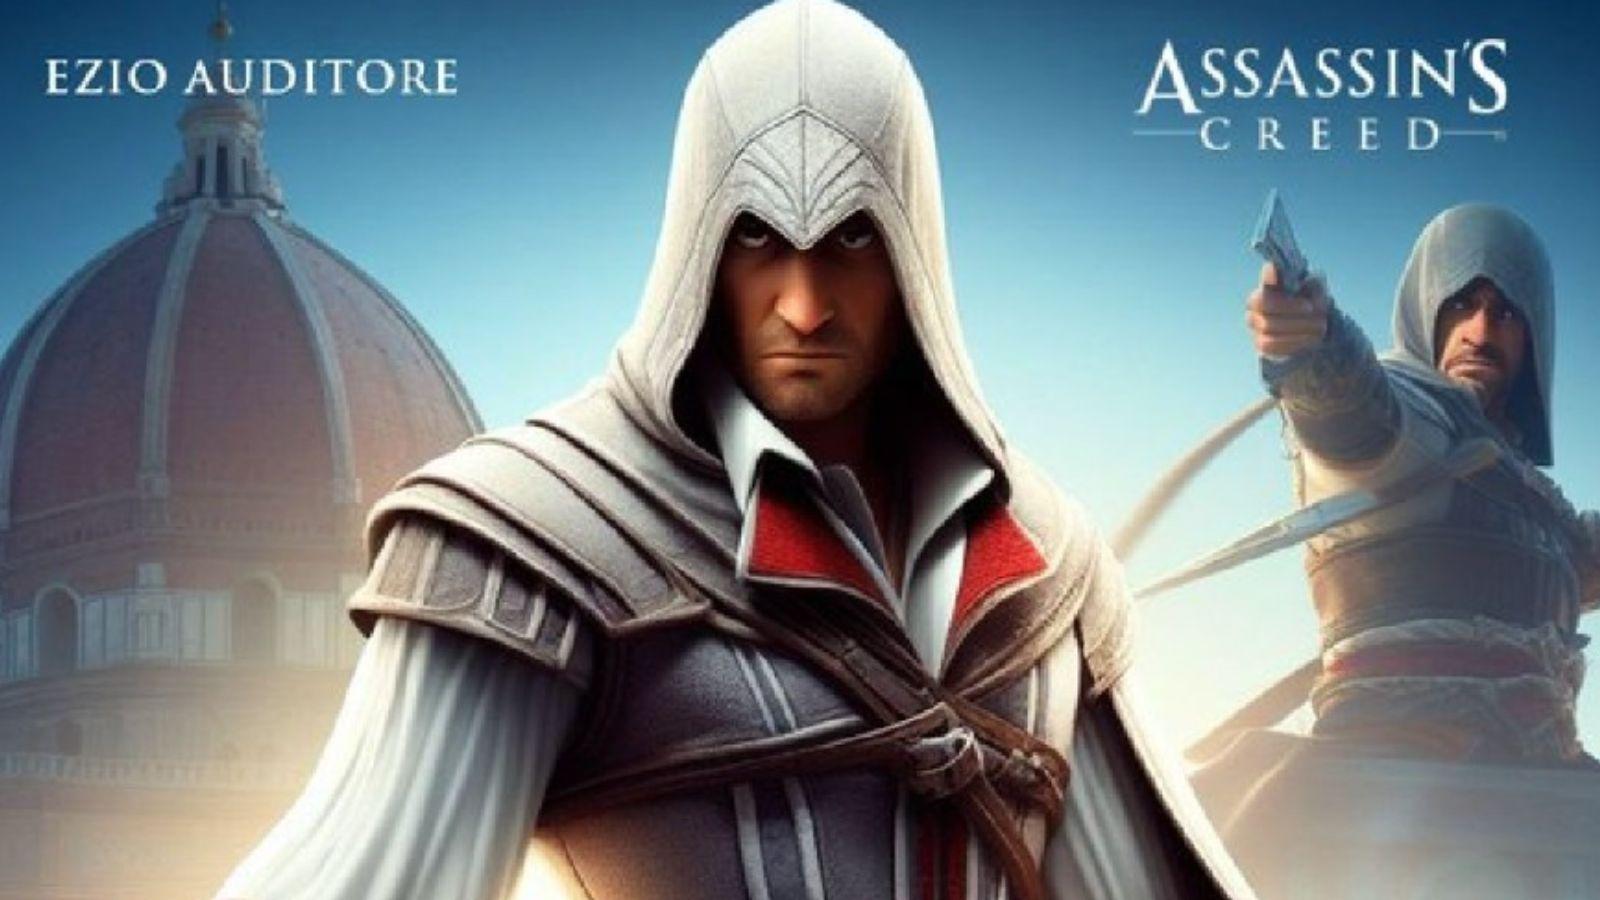 Assassin's Creed: Mirage's 18+ rating leads to online speculation